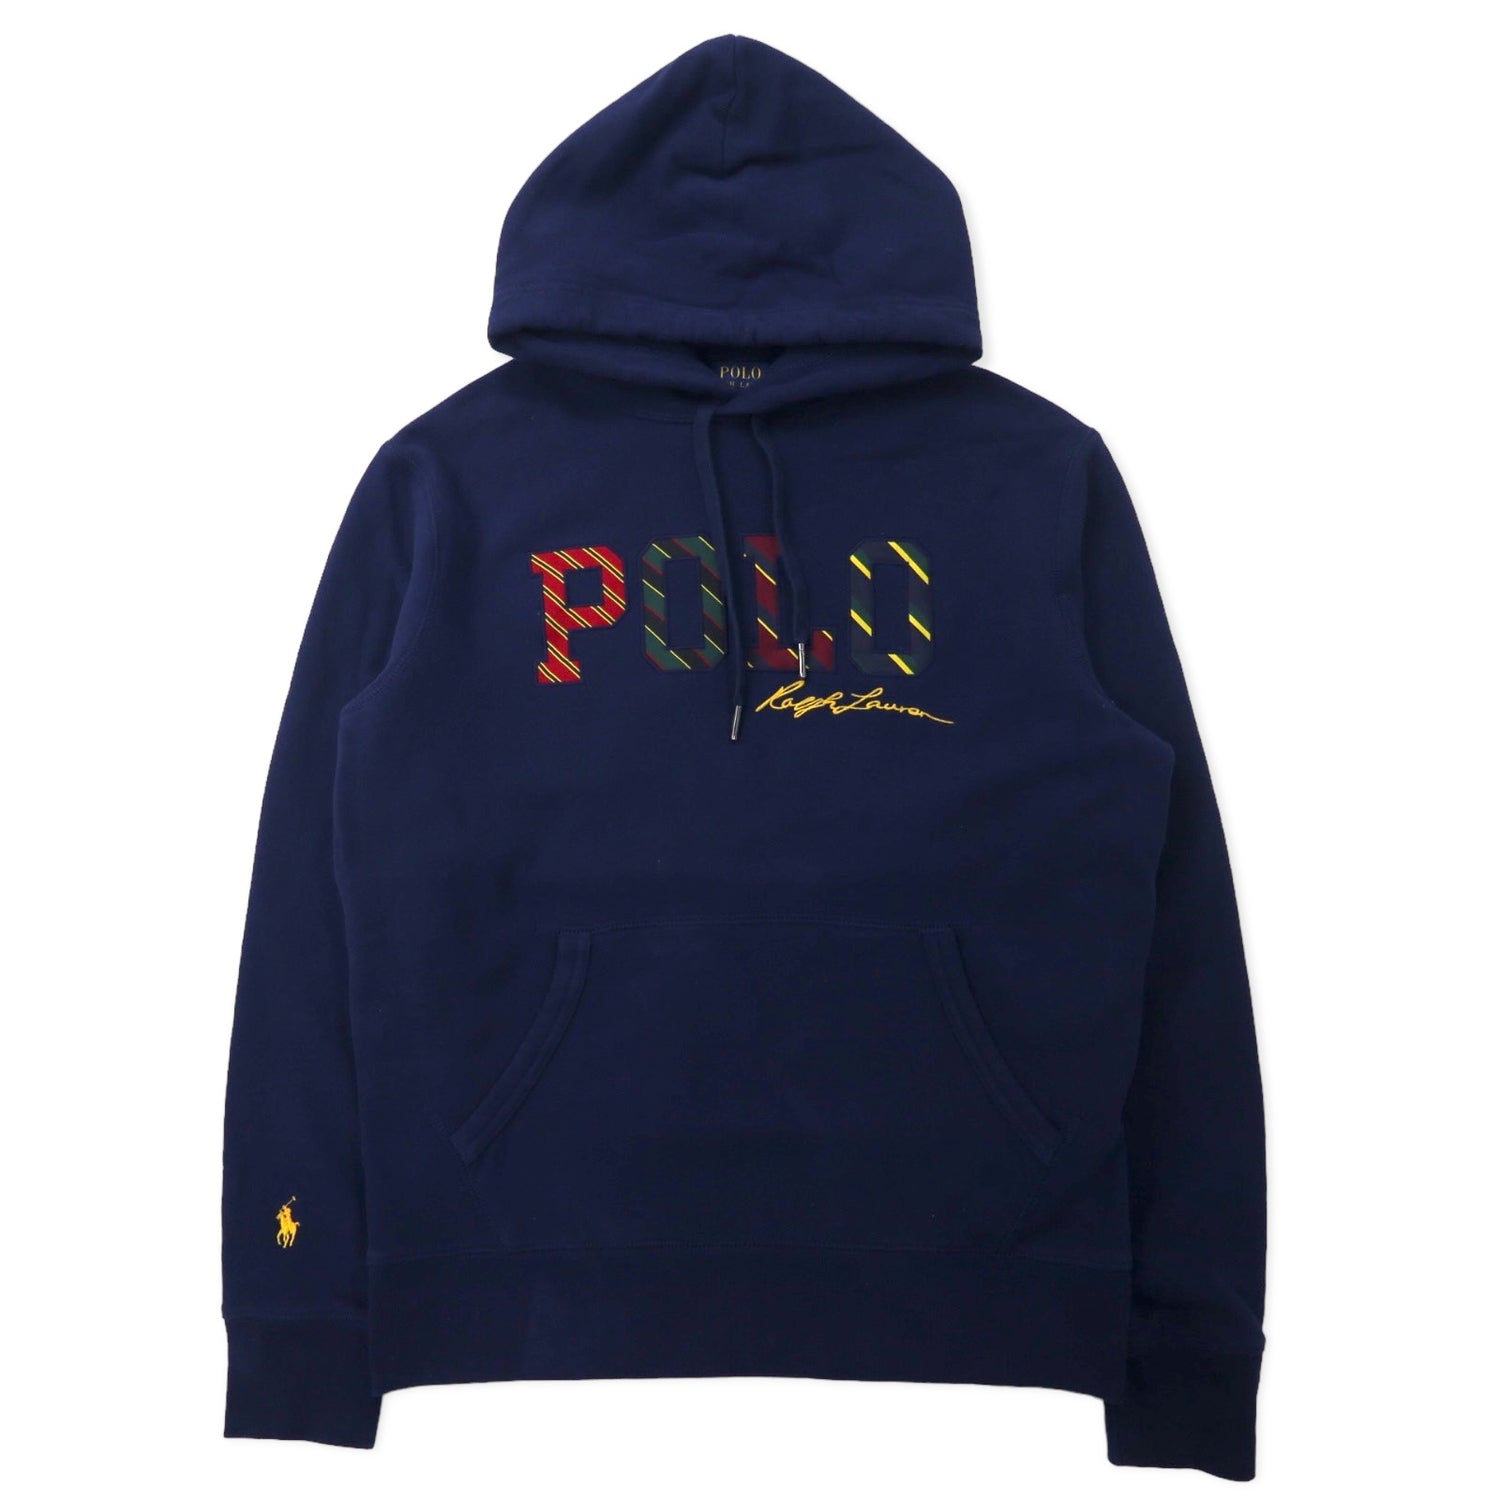 POLO RALPH LAUREN logo embroidery pullover hoodie m navy cotton